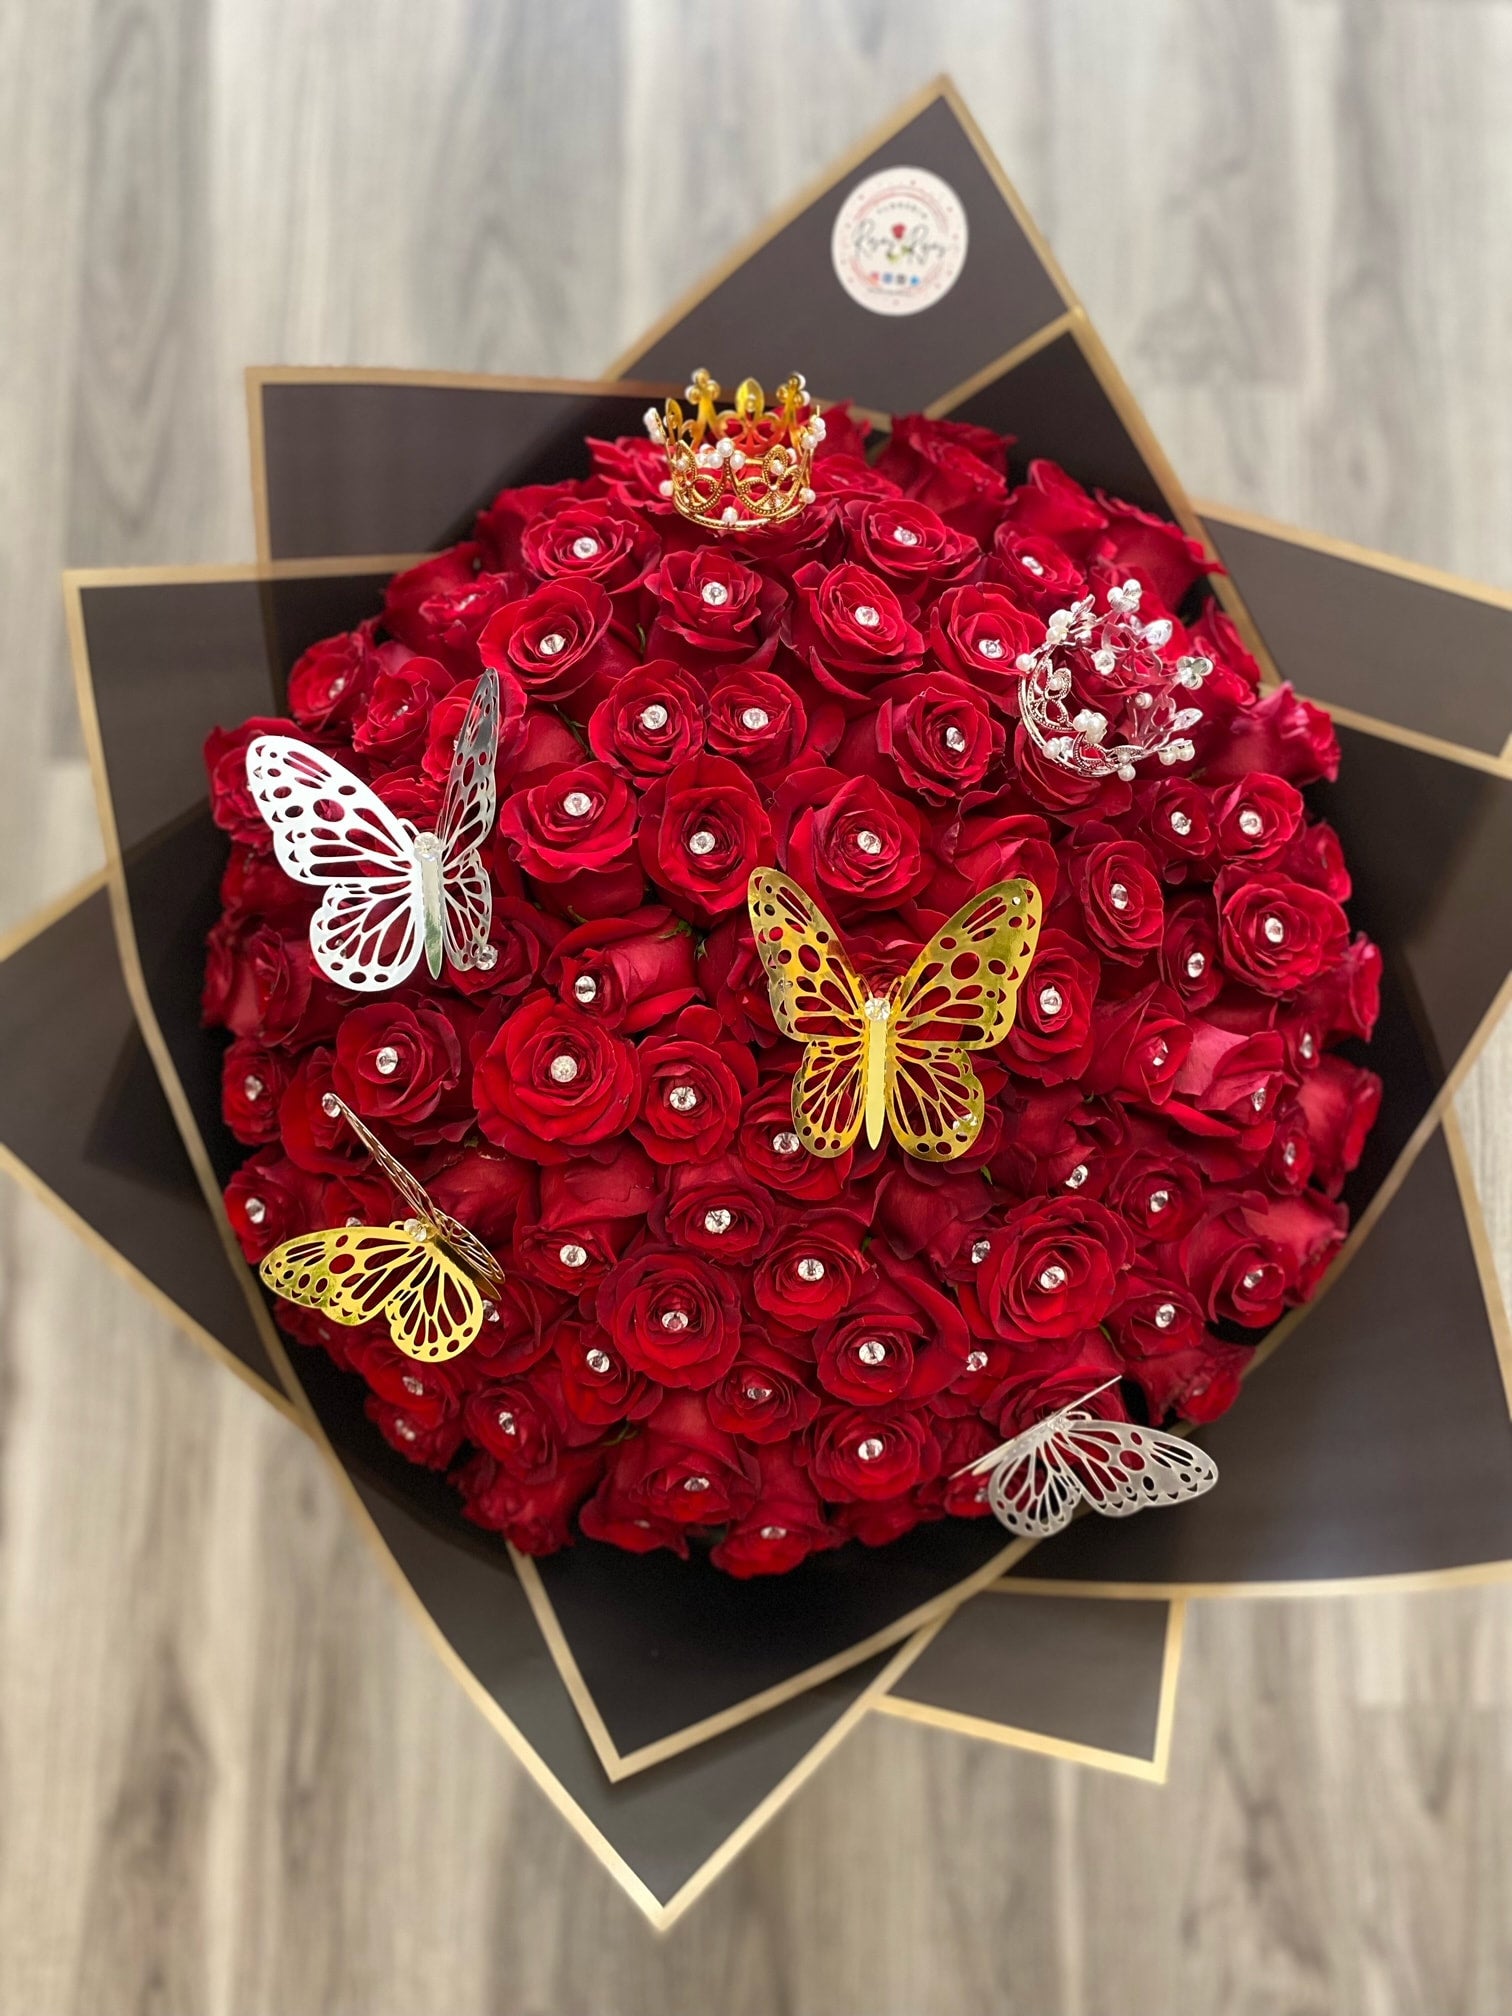 Beautiful Buchon of 75 Red Roses with crown and butterflies